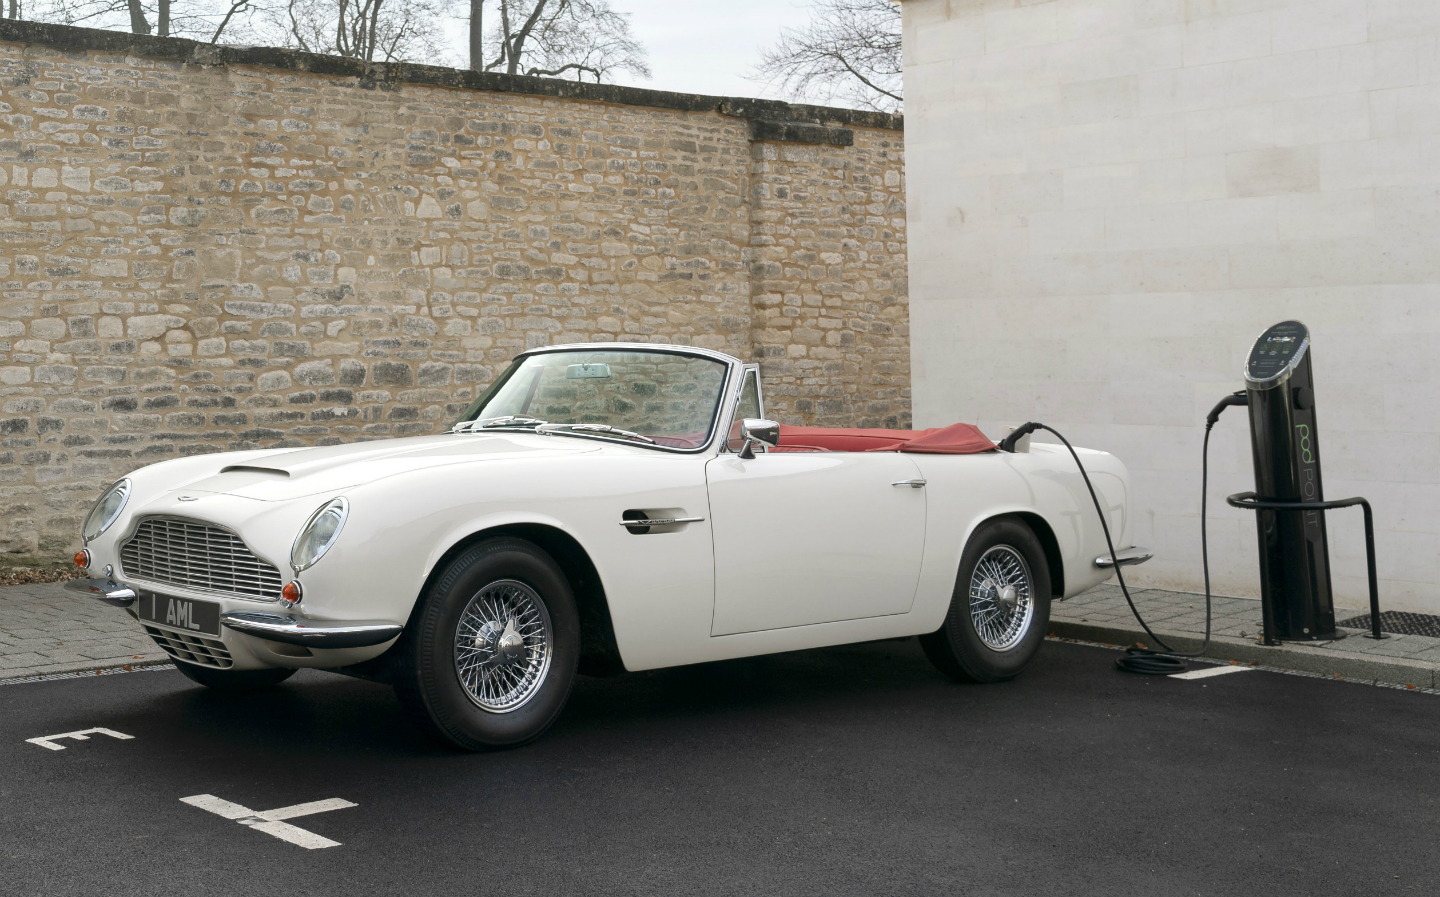 Should classic cars be converted to pure-electric power?